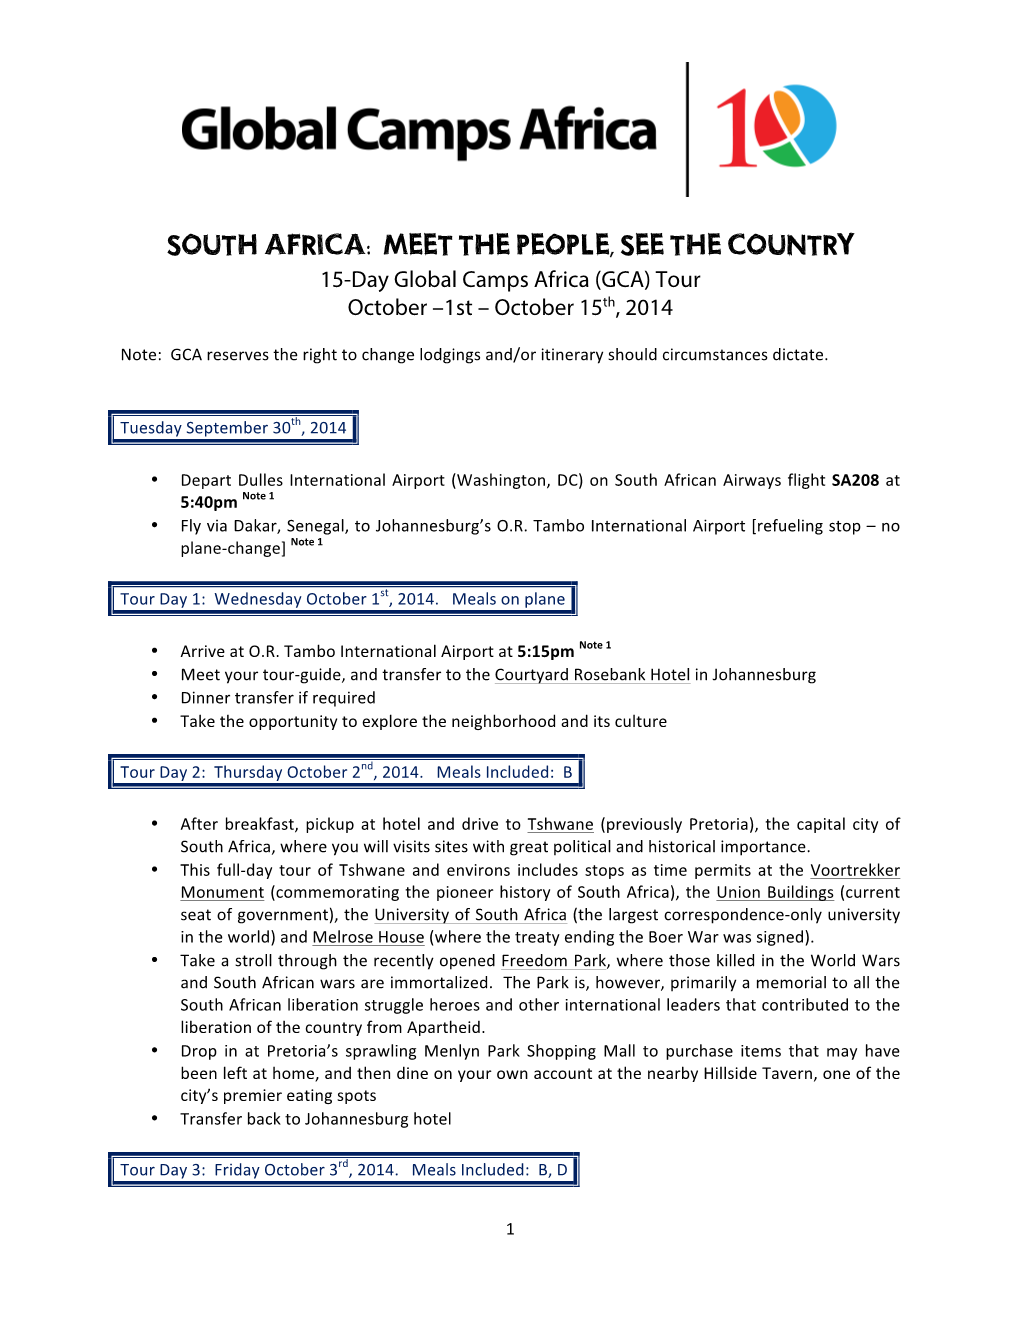 SOUTH AFRICA: MEET the PEOPLE, SEE the COUNTRY 15-Day Global Camps Africa (GCA) Tour October –1St – October 15Th, 2014